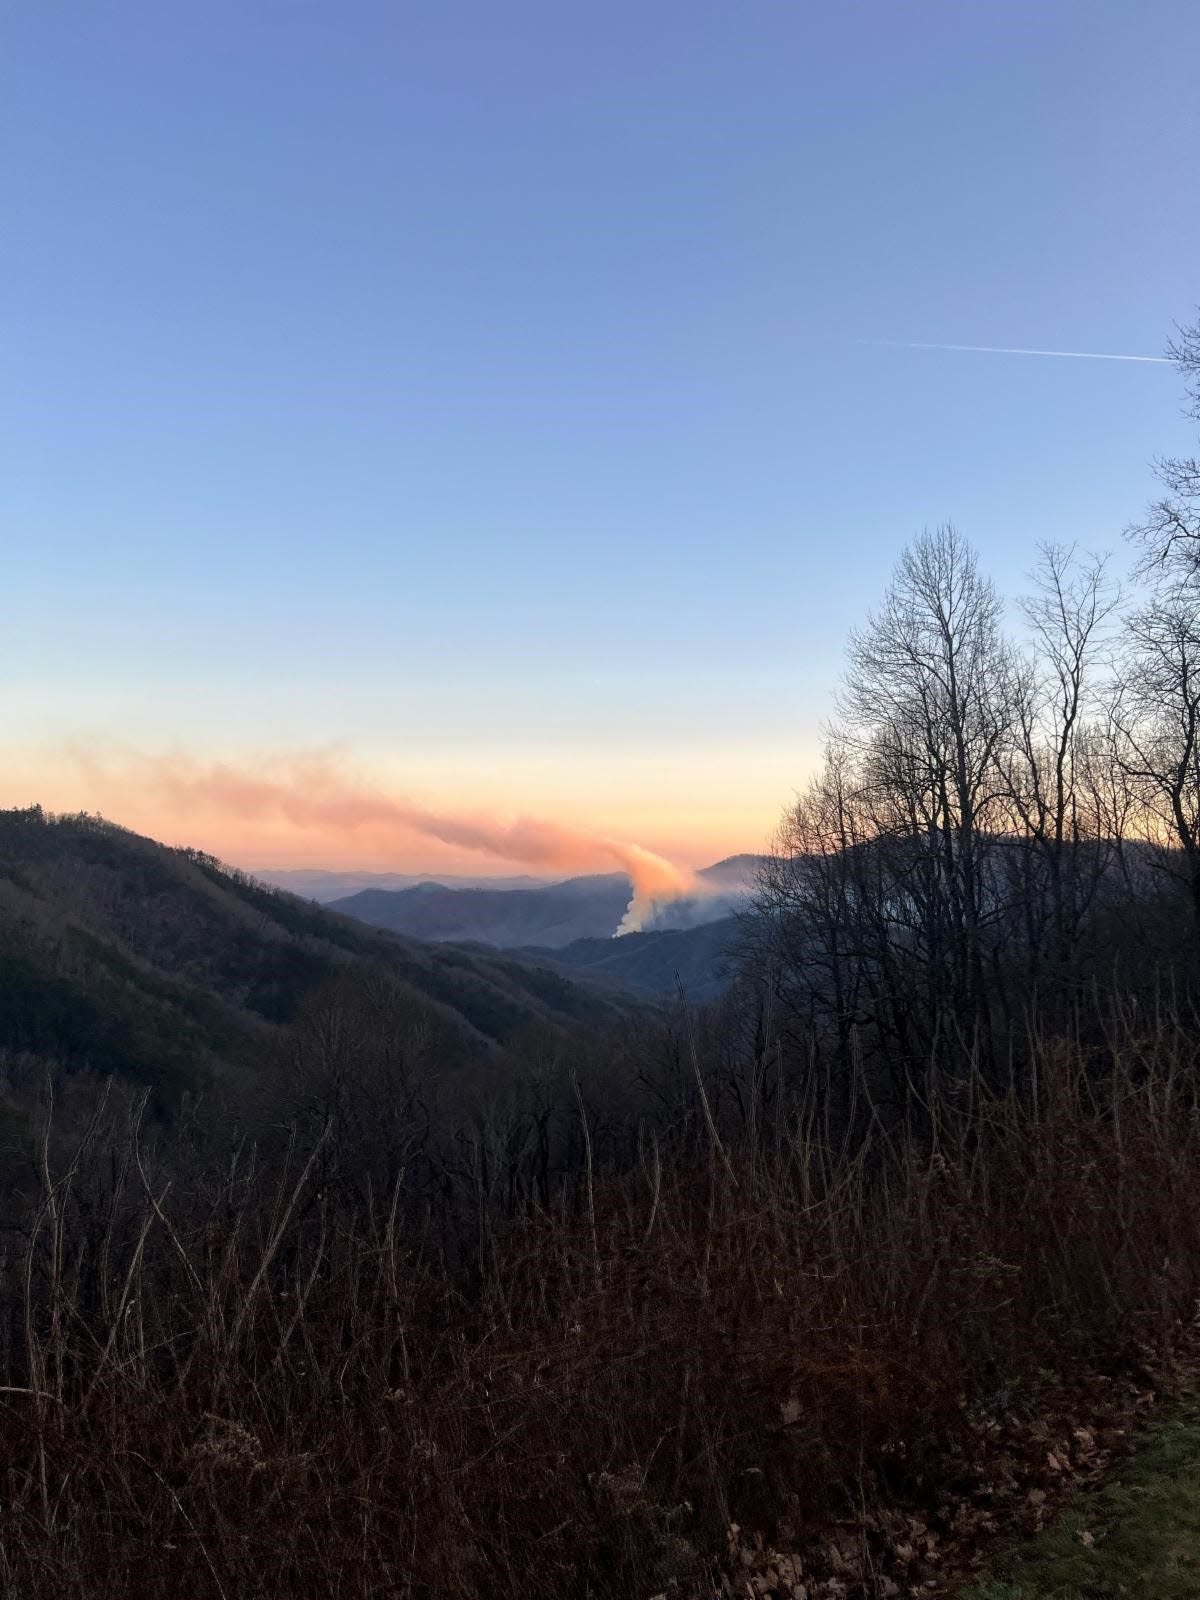 Smoke is visible from the Locust No. 2 Fire in Pisgah National Forest.